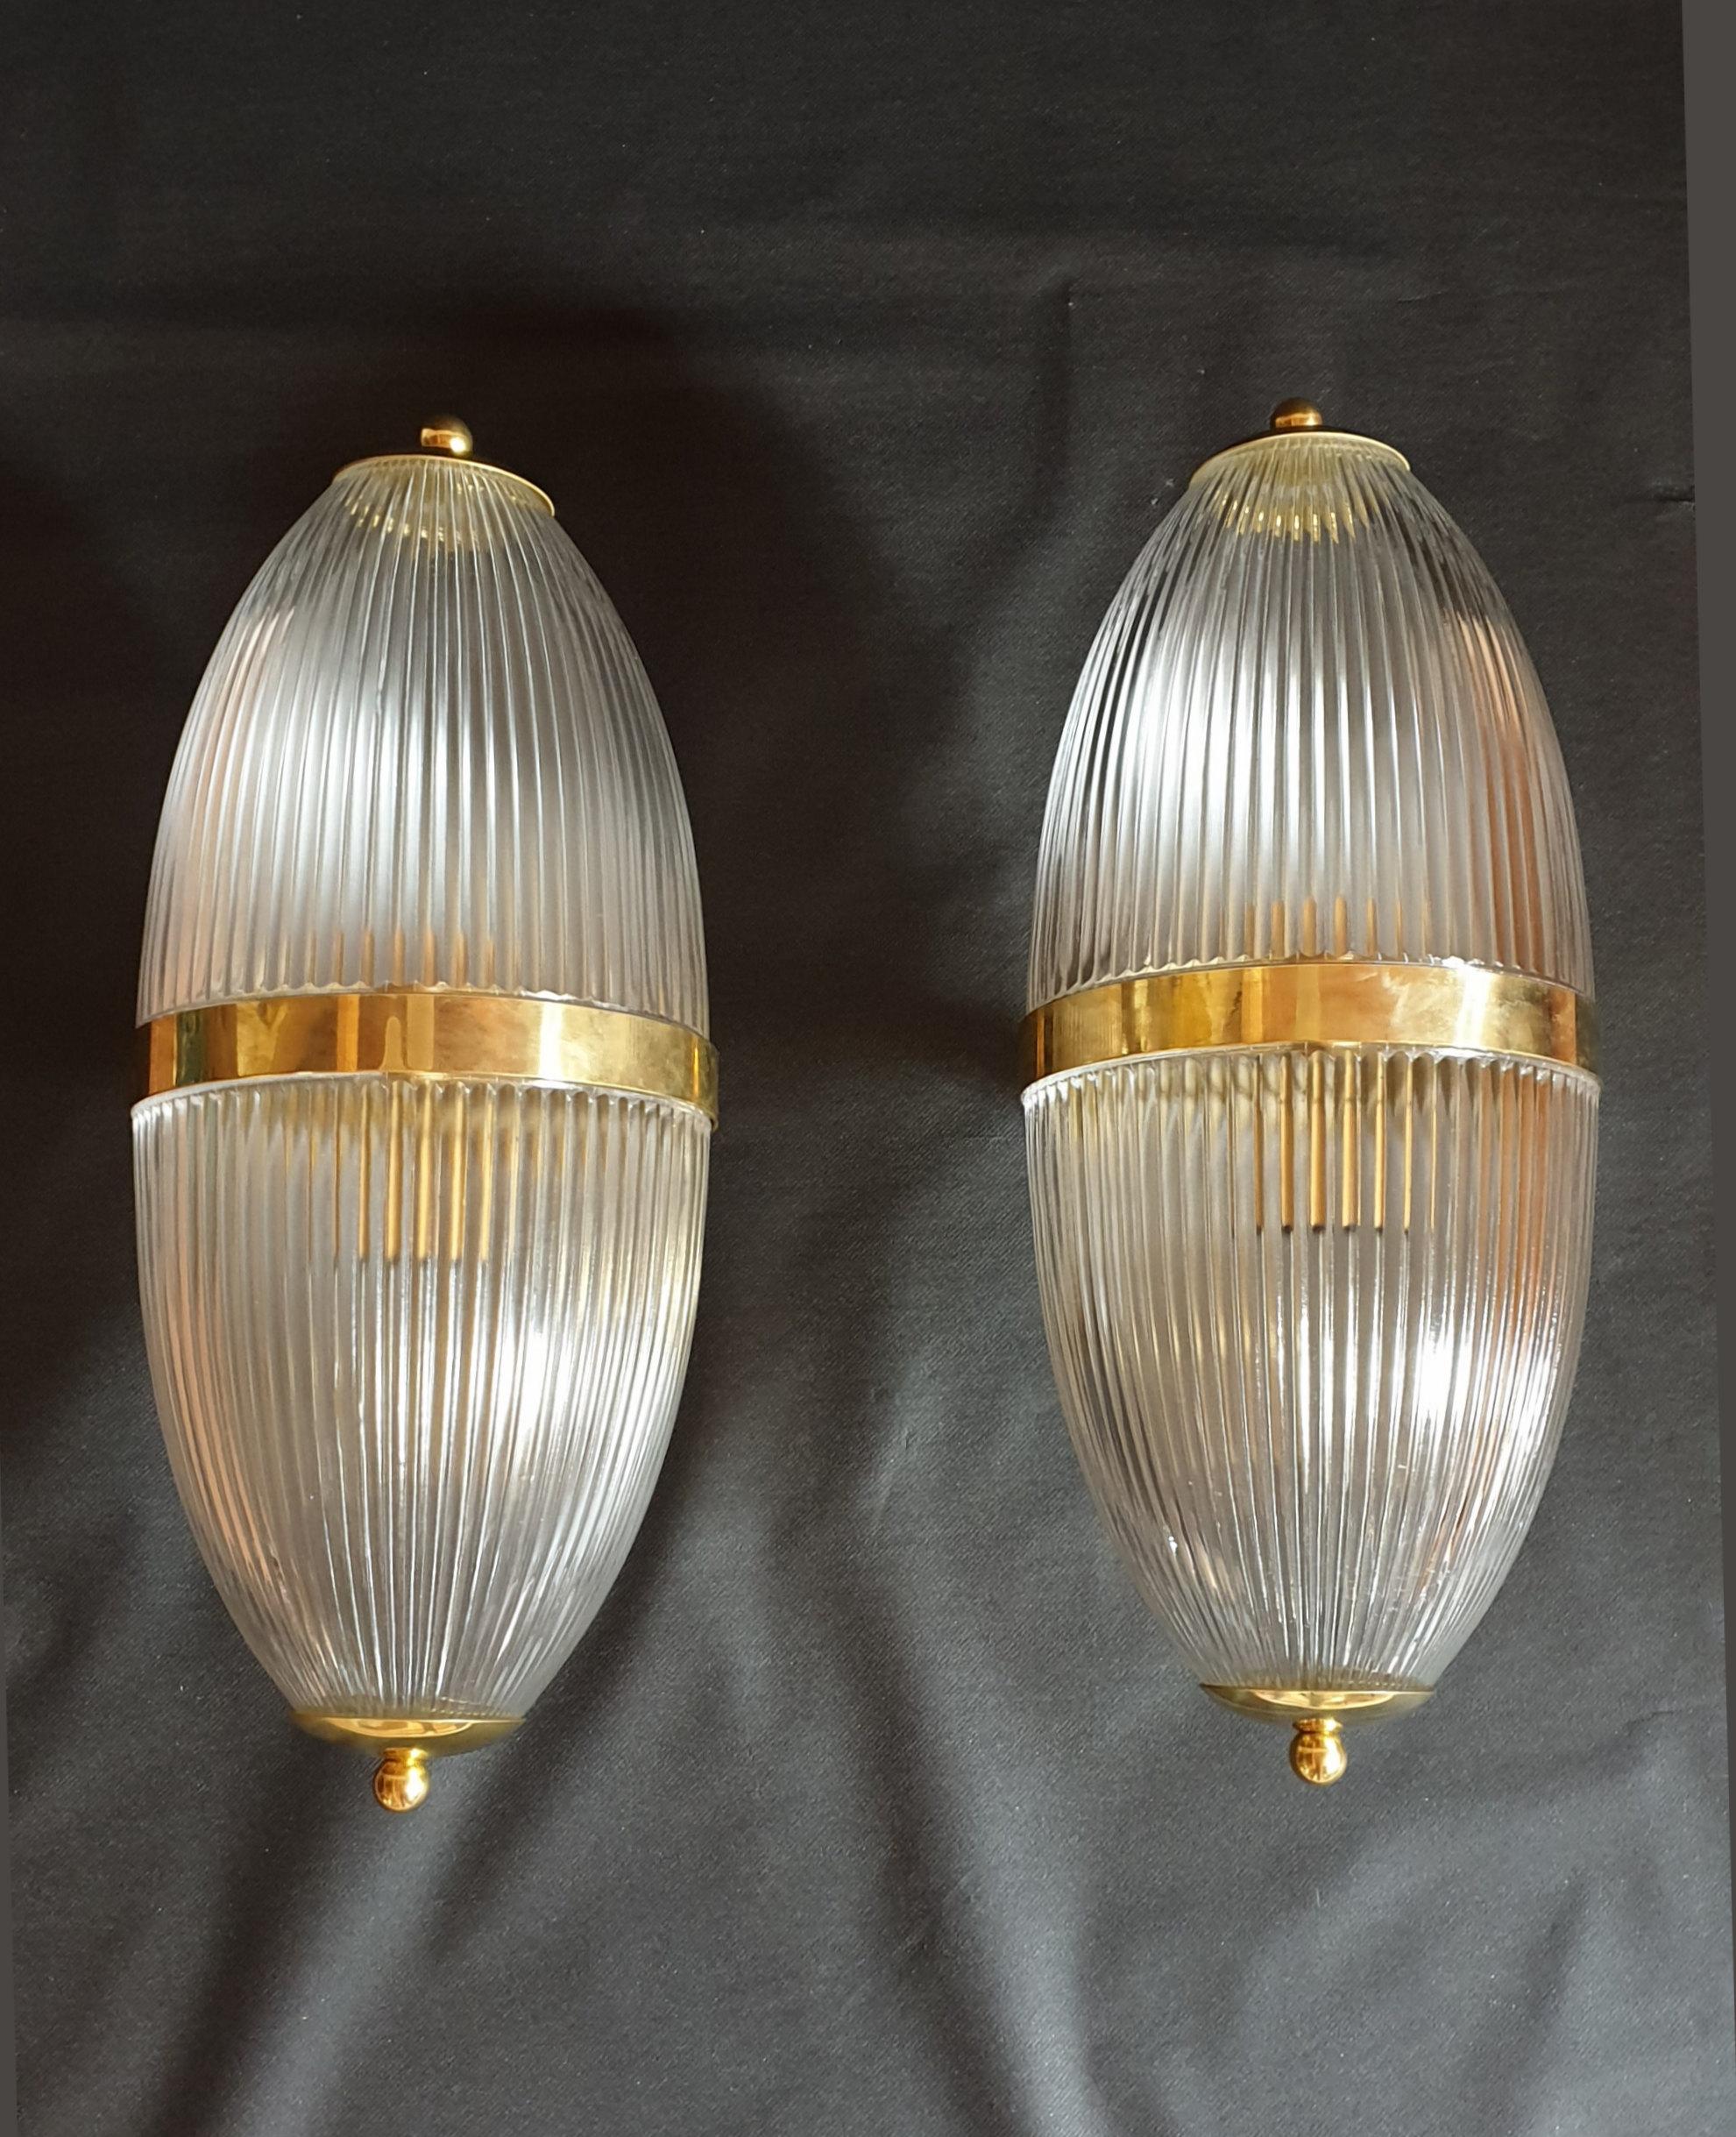 Mid-20th Century Pair of Large Mid-Century Modern Clear Glass & Brass Italian Sconces or Lanterns